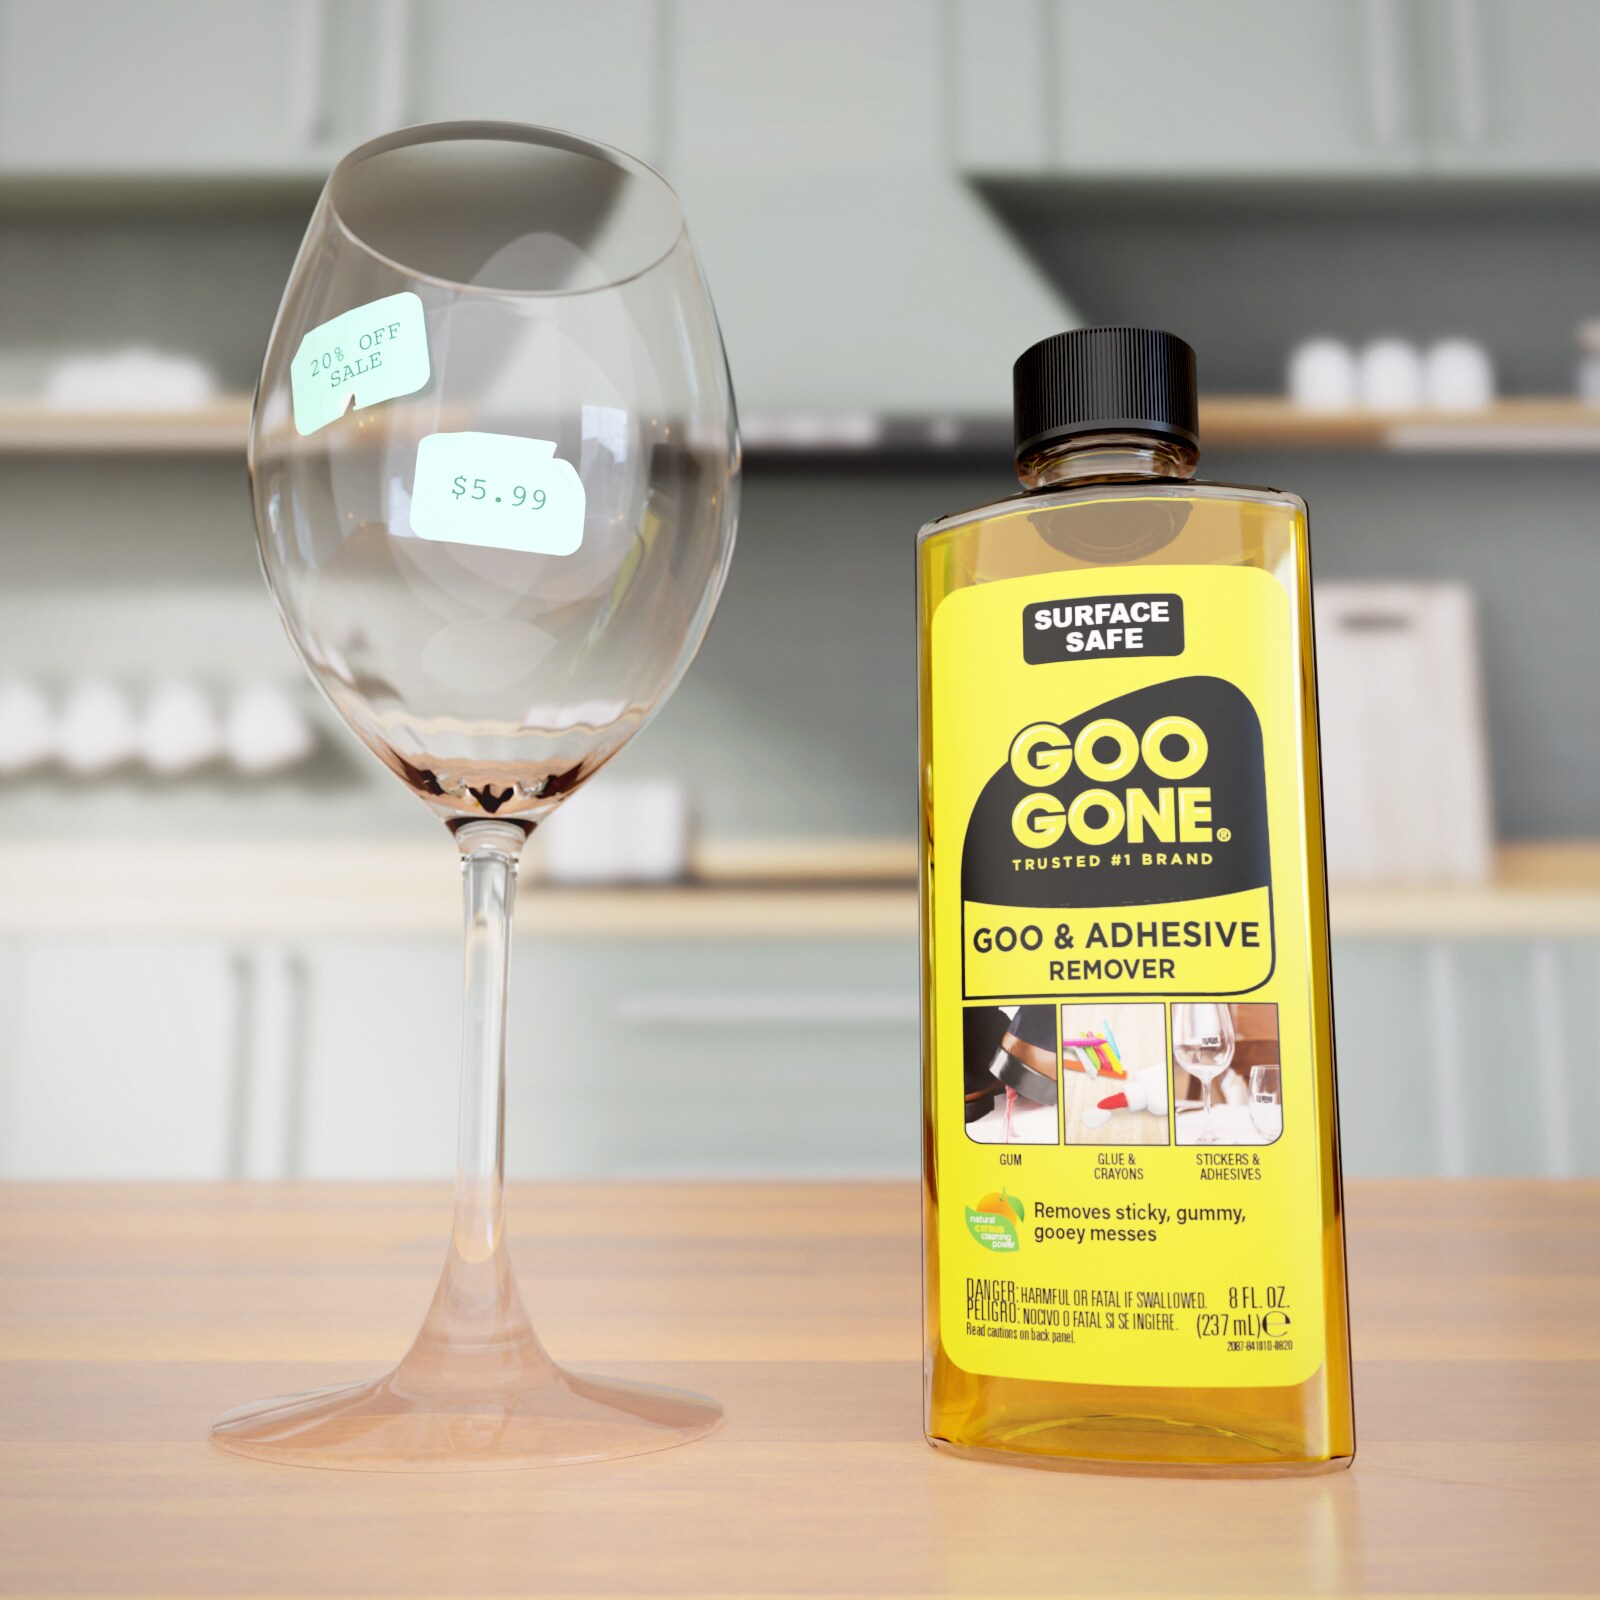 Goo Gone - 2oz Bottle - Citrus Scented - Cuts Grease, Oil, Gum, Adhesive  Residue (Pack of 3)